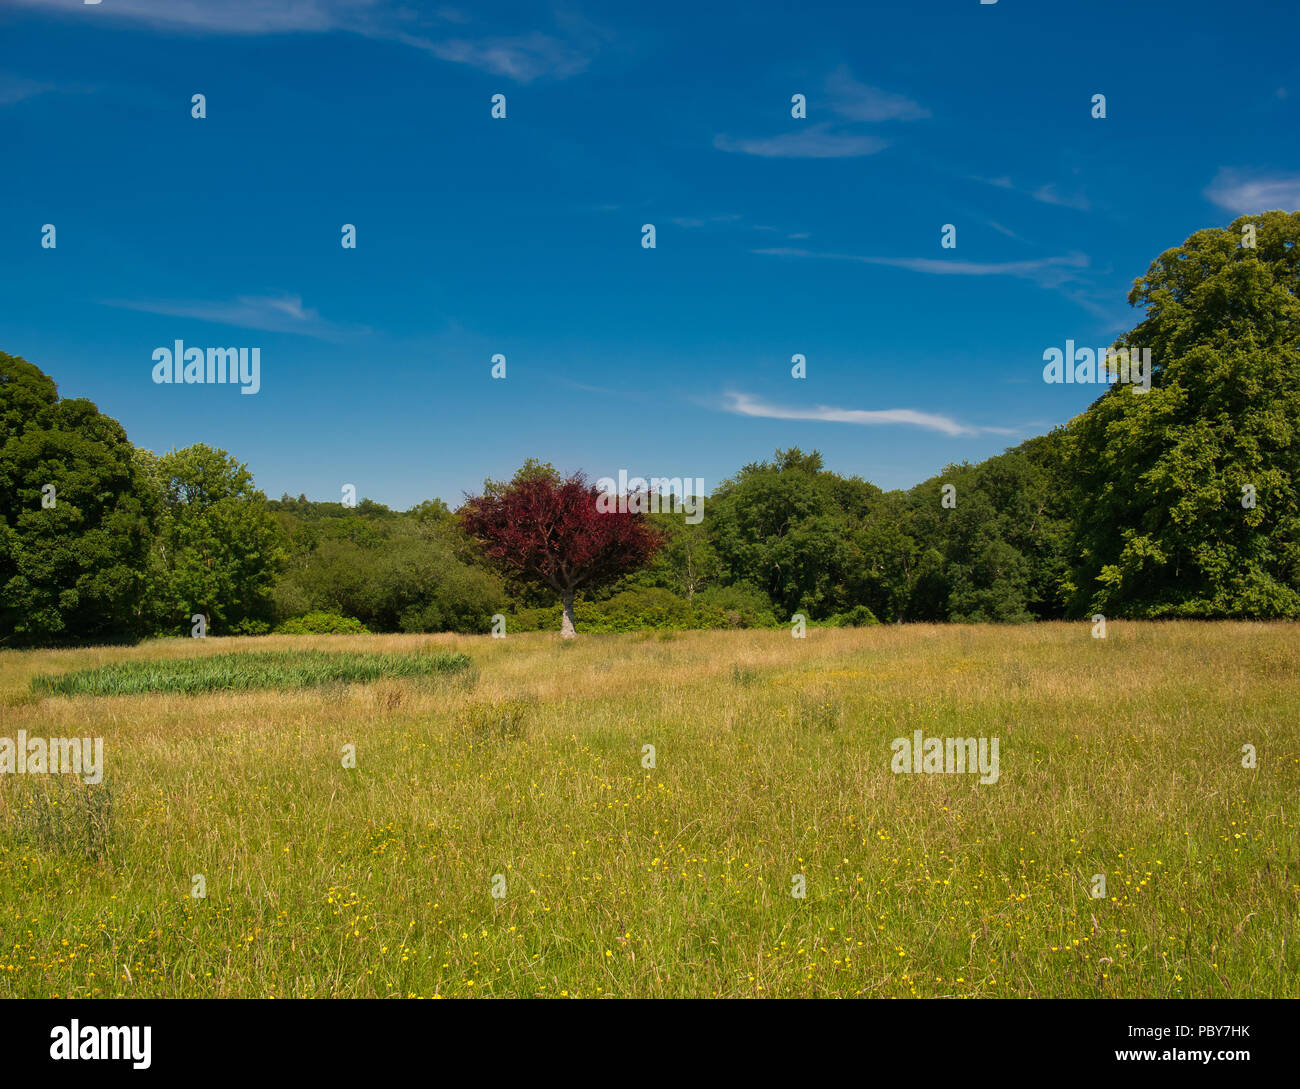 A green meadow with a red tree in the middle and a green forest can be seen in the background in sunshine with blue sky Stock Photo